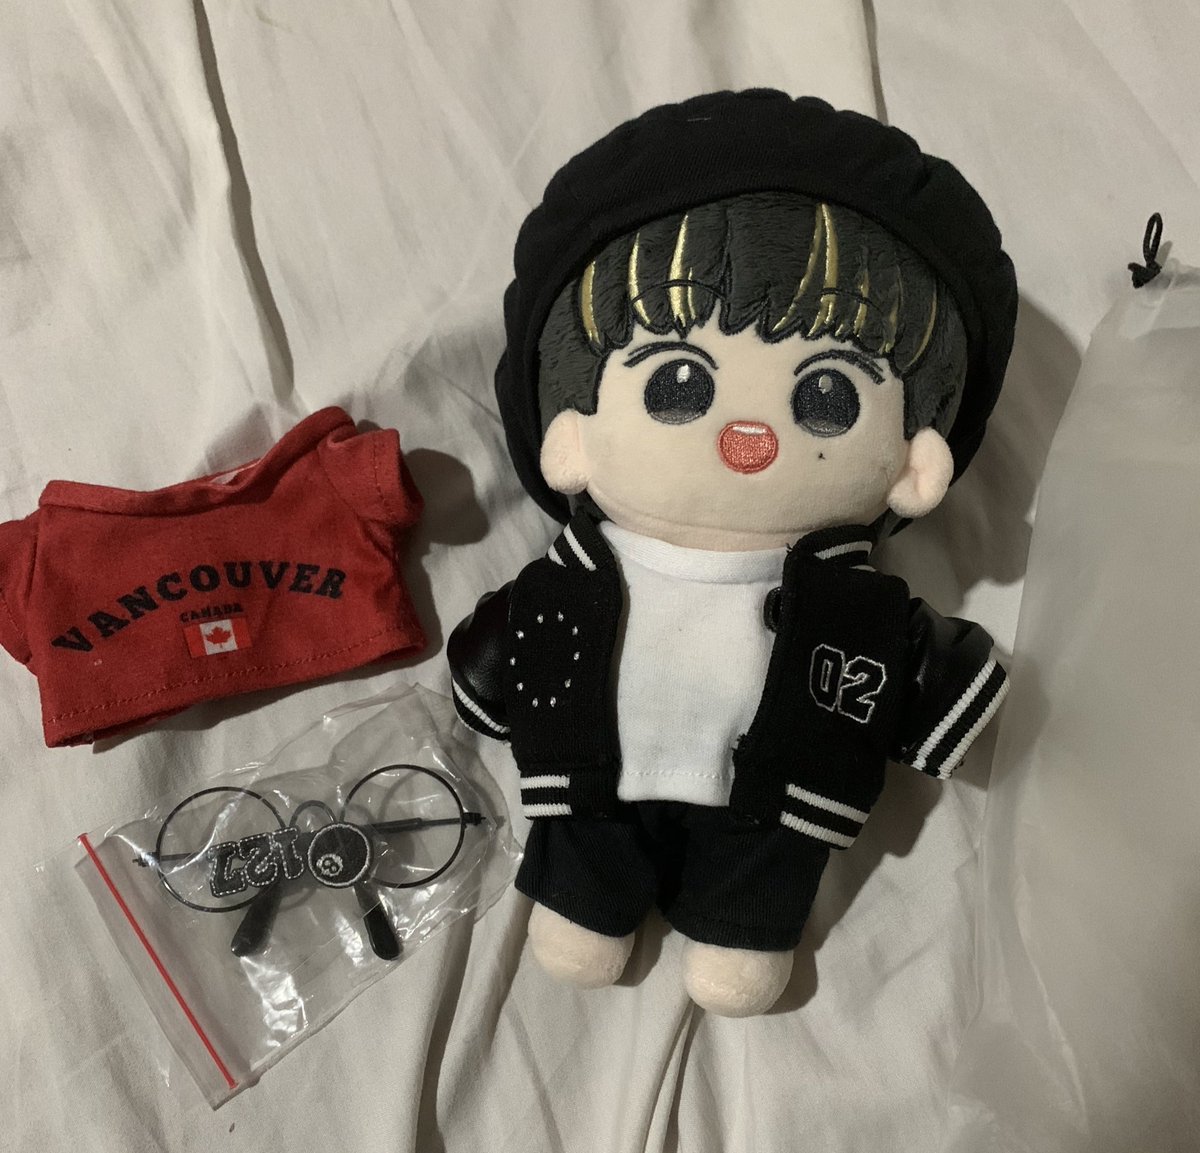 WTS / want to sell

Mark Little Hero Neo Zone 20 cm plush doll from Mark Lee Bar @.MarkLee_bar

💸650k/$45
✅Good condition
✅Full set with clothes (bonus glasses, & Vancouver tshirt)
✅Shopee
✅WW
📍Jaksel🇮🇩

tags. mark kuaci nct 인형